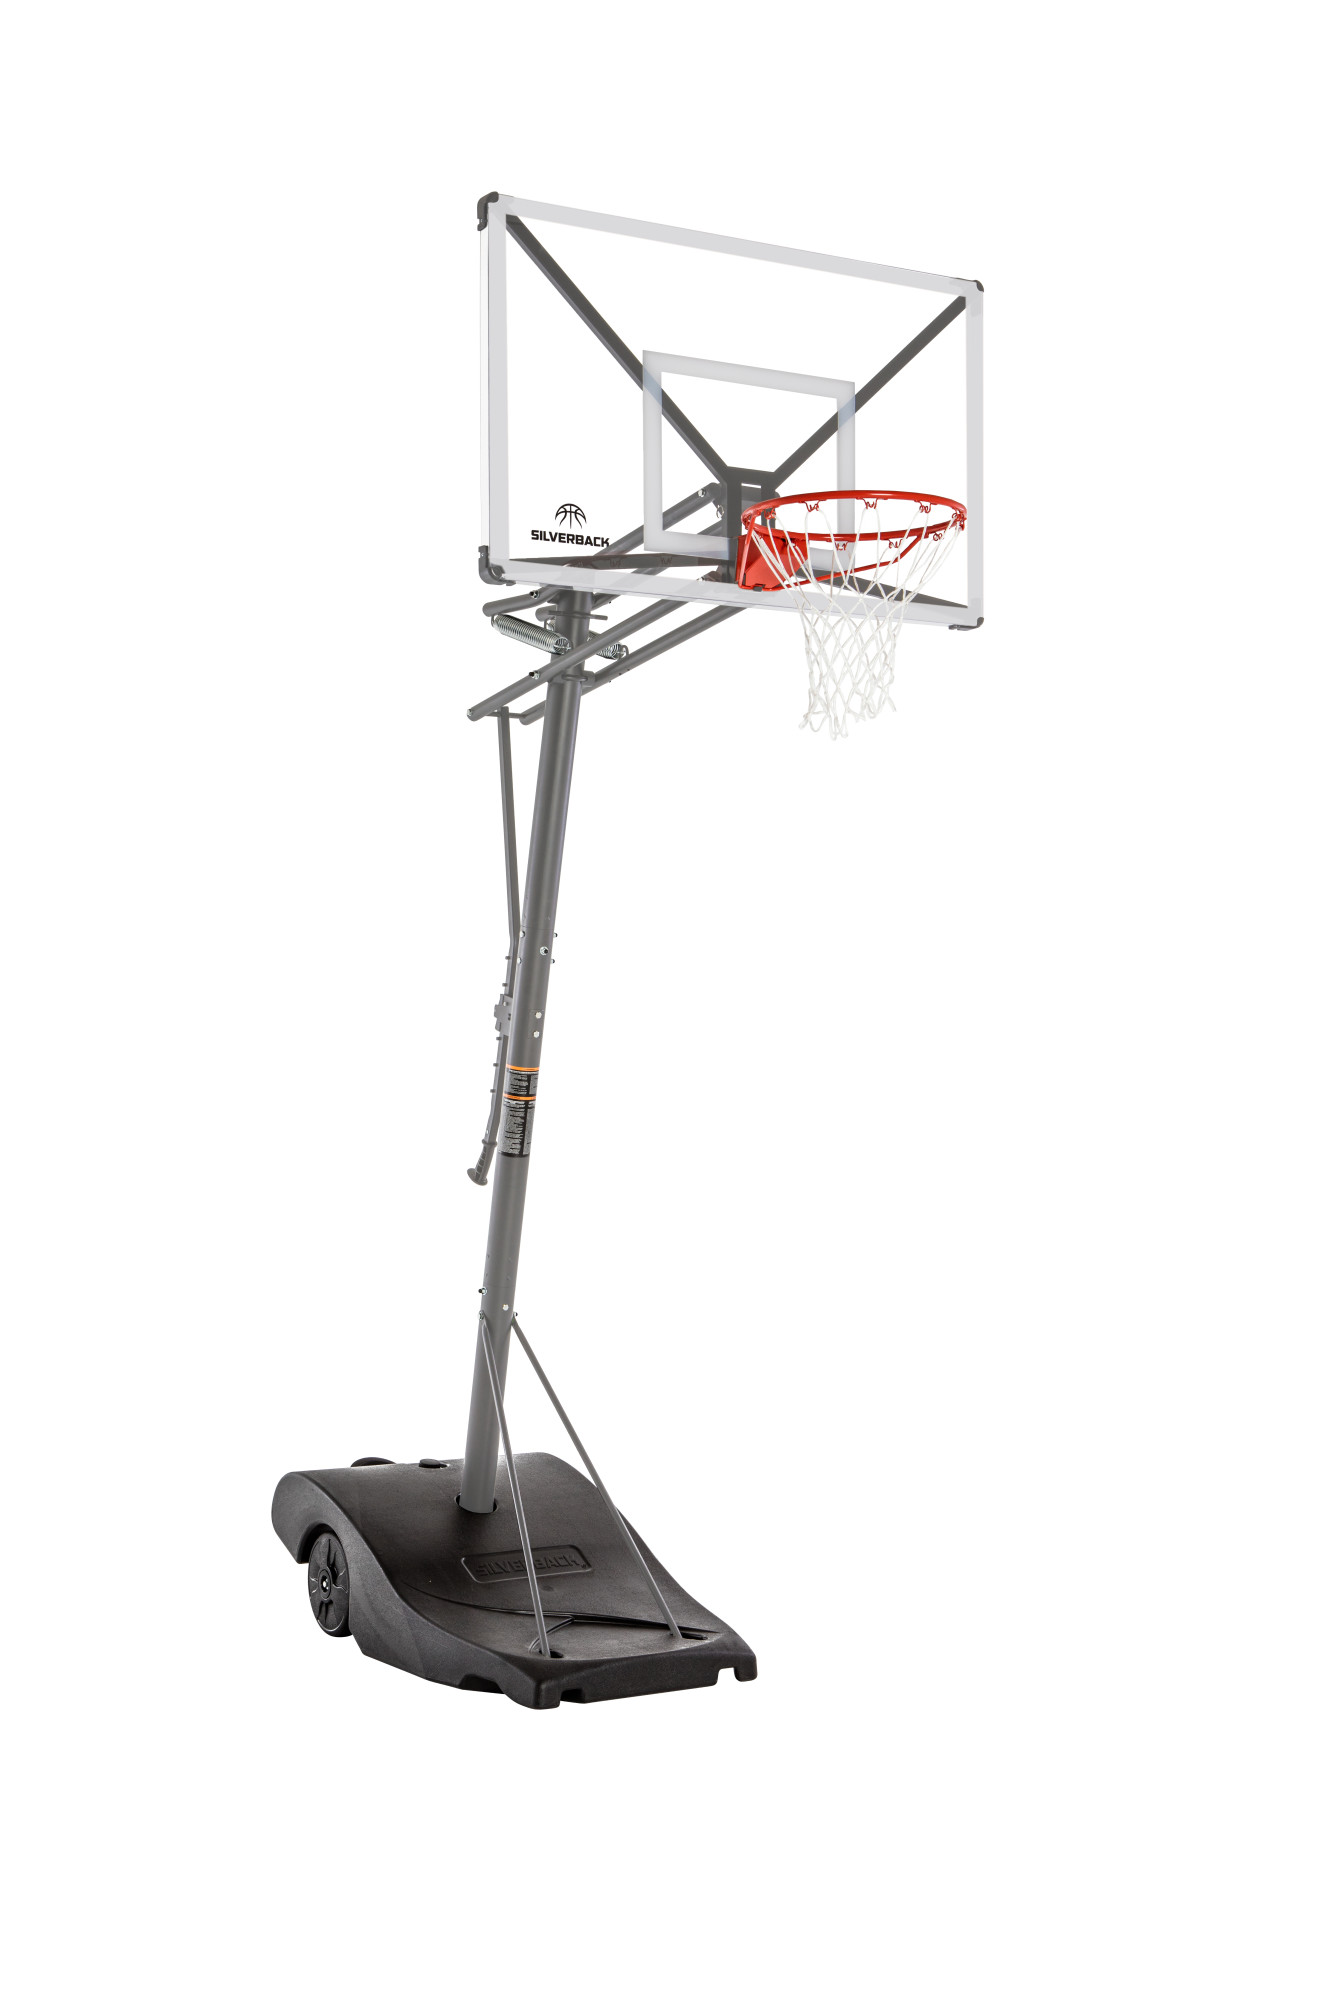 Silverback SBX 54 In. Backboard Portable Basketball Height-Adjustable Hoop System - image 1 of 8